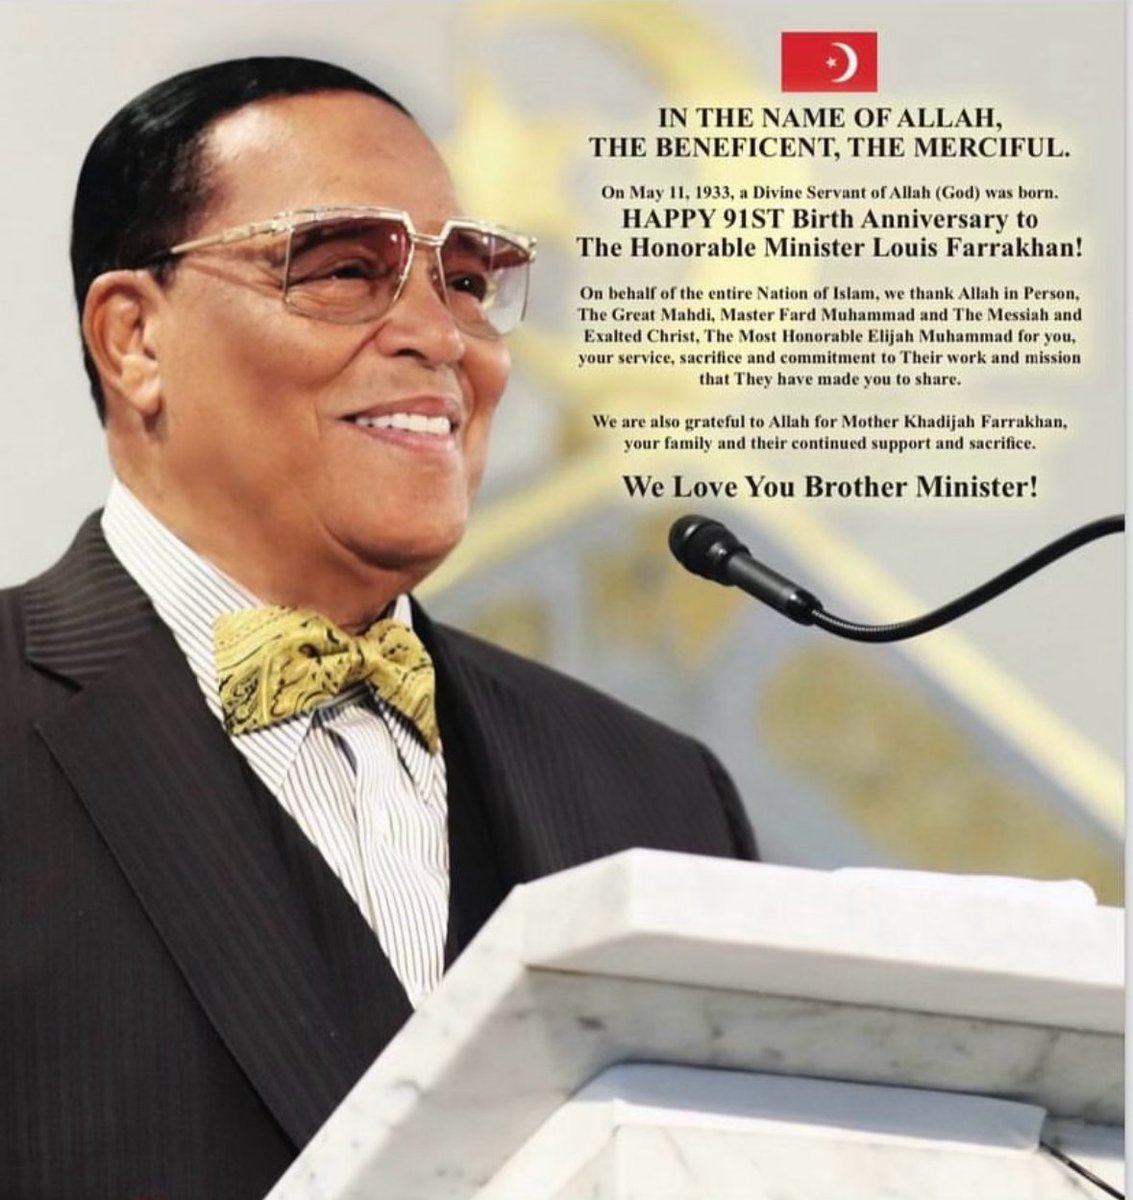 As-Salaam-Alakium family; Today is a special day a glorious day- Happy 91st Birth Anniversary to our Beloved Minister @LouisFarrakhan. We Thank Allah so very much for your life and for ALL that you have done for us!